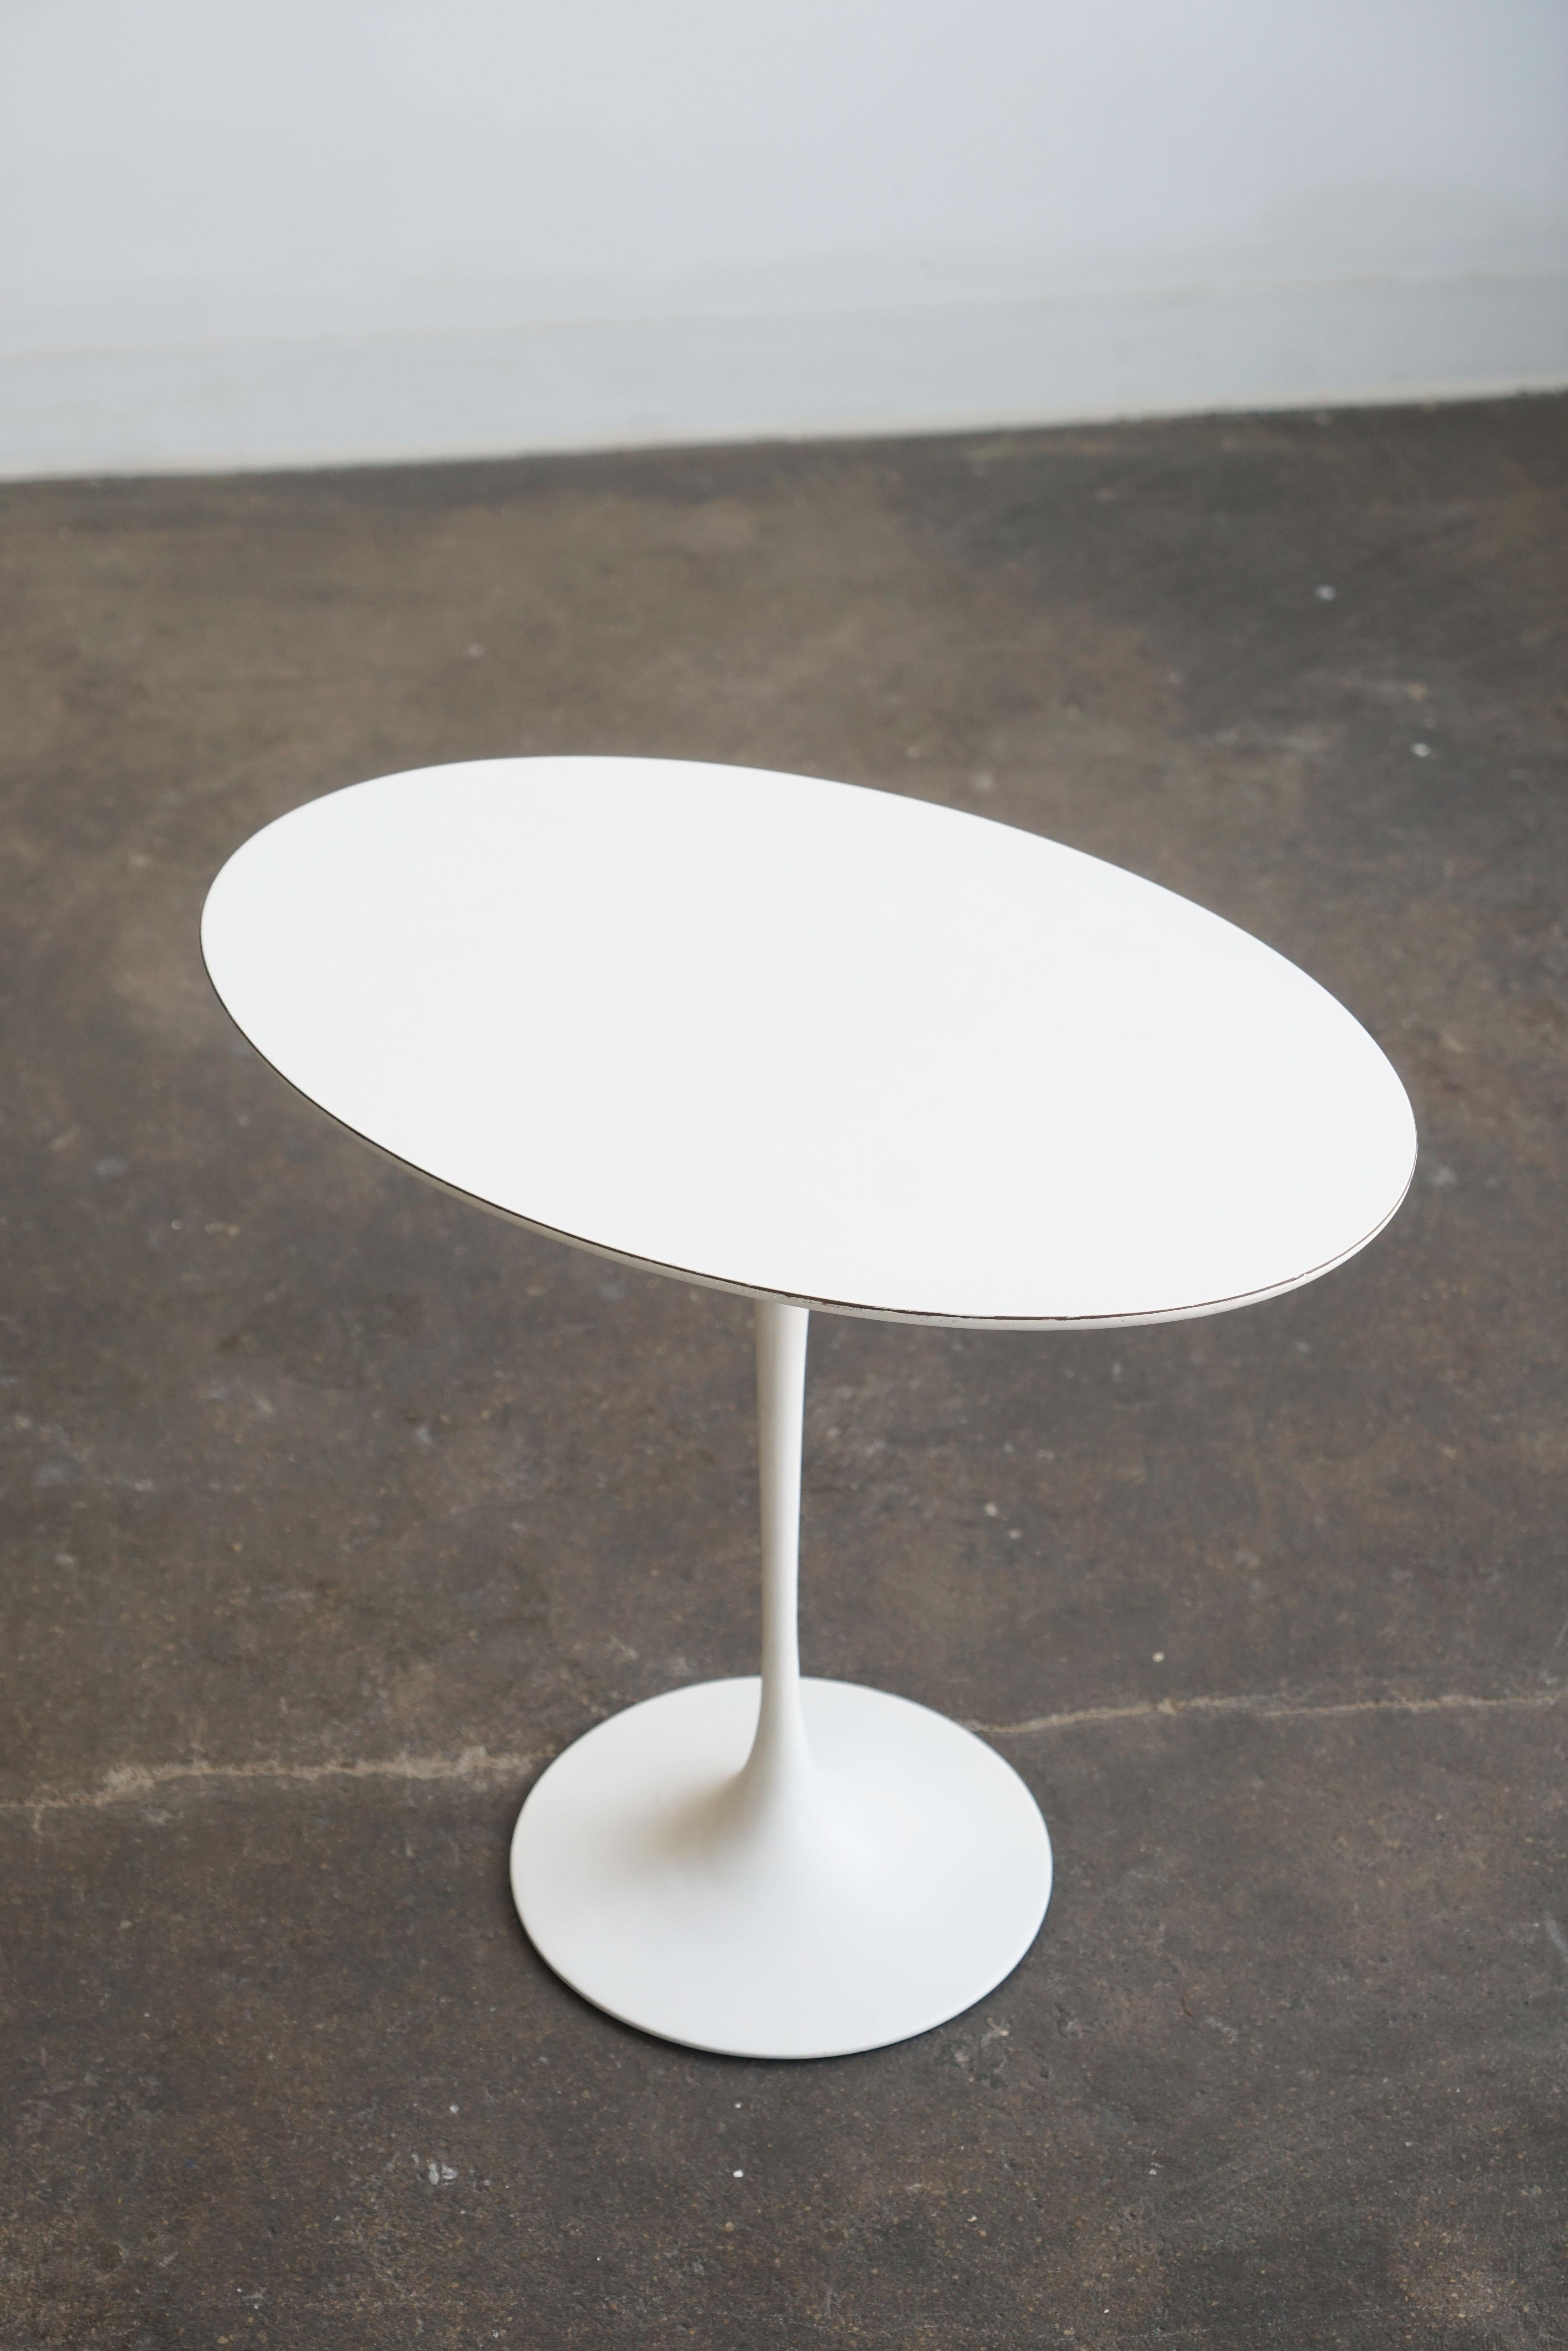 Very early Eero Saarinen for Knoll Tulip table, oval shaped top circa 1957 In Good Condition For Sale In Chicago, IL